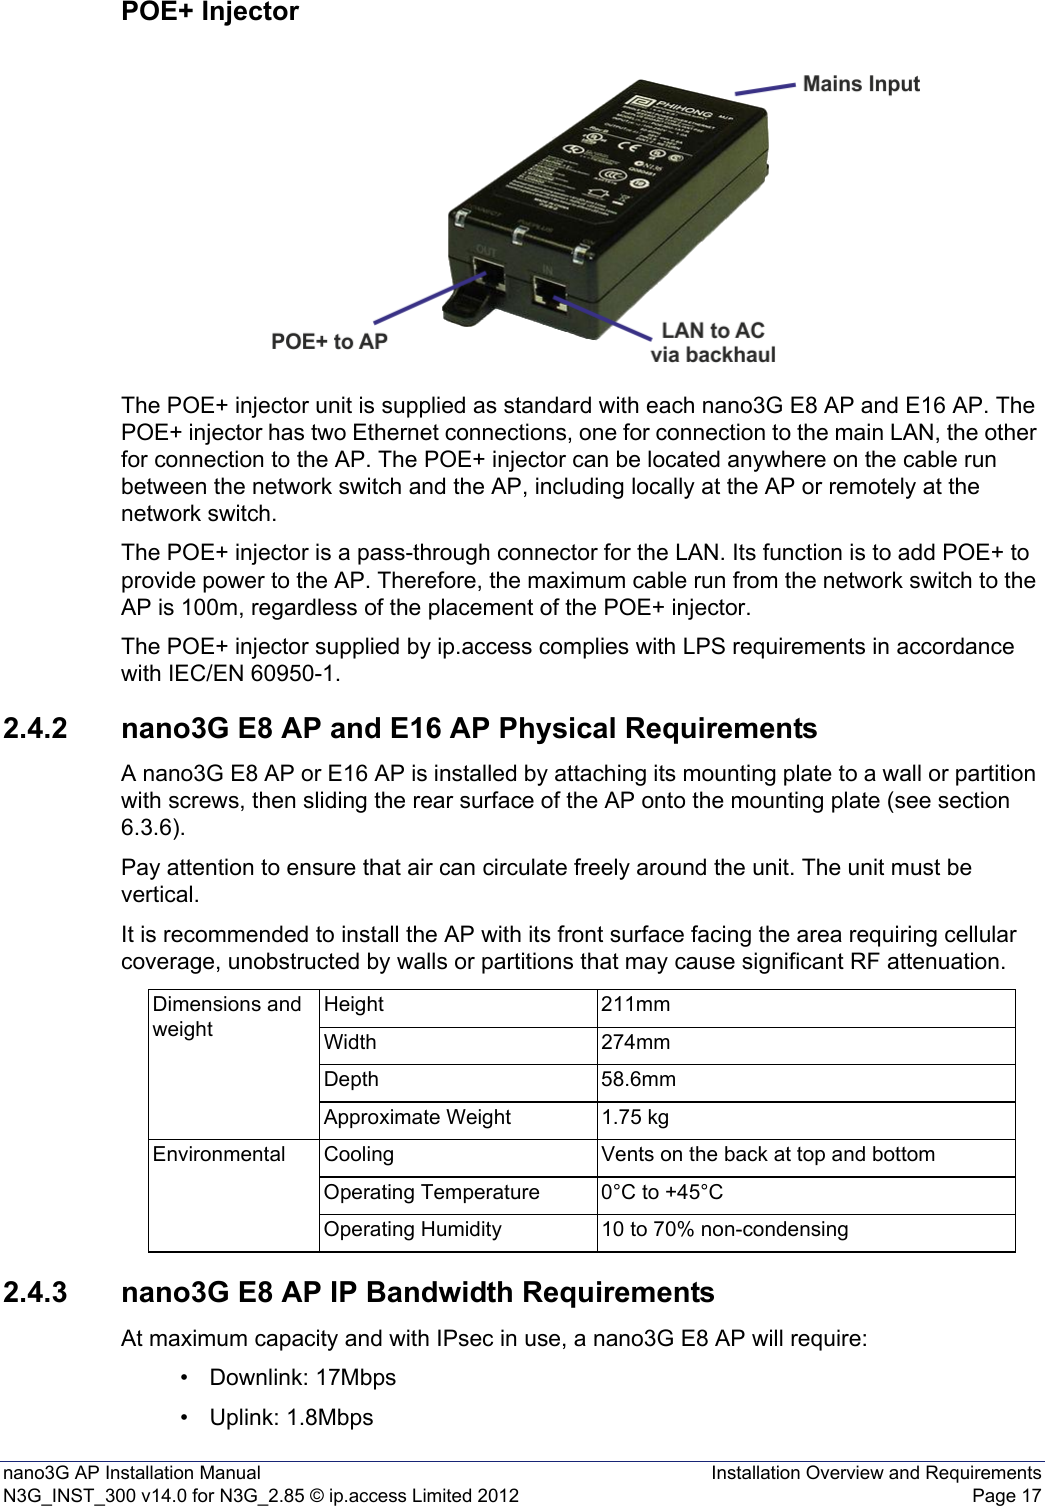 nano3G AP Installation Manual Installation Overview and RequirementsN3G_INST_300 v14.0 for N3G_2.85 © ip.access Limited 2012 Page 17POE+ InjectorThe POE+ injector unit is supplied as standard with each nano3G E8 AP and E16 AP. The POE+ injector has two Ethernet connections, one for connection to the main LAN, the other for connection to the AP. The POE+ injector can be located anywhere on the cable run between the network switch and the AP, including locally at the AP or remotely at the network switch.The POE+ injector is a pass-through connector for the LAN. Its function is to add POE+ to provide power to the AP. Therefore, the maximum cable run from the network switch to the AP is 100m, regardless of the placement of the POE+ injector.The POE+ injector supplied by ip.access complies with LPS requirements in accordance with IEC/EN 60950-1.2.4.2 nano3G E8 AP and E16 AP Physical RequirementsA nano3G E8 AP or E16 AP is installed by attaching its mounting plate to a wall or partition with screws, then sliding the rear surface of the AP onto the mounting plate (see section 6.3.6).Pay attention to ensure that air can circulate freely around the unit. The unit must be vertical.It is recommended to install the AP with its front surface facing the area requiring cellular coverage, unobstructed by walls or partitions that may cause significant RF attenuation.2.4.3 nano3G E8 AP IP Bandwidth RequirementsAt maximum capacity and with IPsec in use, a nano3G E8 AP will require:• Downlink: 17Mbps• Uplink: 1.8MbpsDimensions and weightHeight 211mmWidth 274mmDepth 58.6mmApproximate Weight 1.75 kgEnvironmental Cooling Vents on the back at top and bottomOperating Temperature 0°C to +45°COperating Humidity 10 to 70% non-condensing